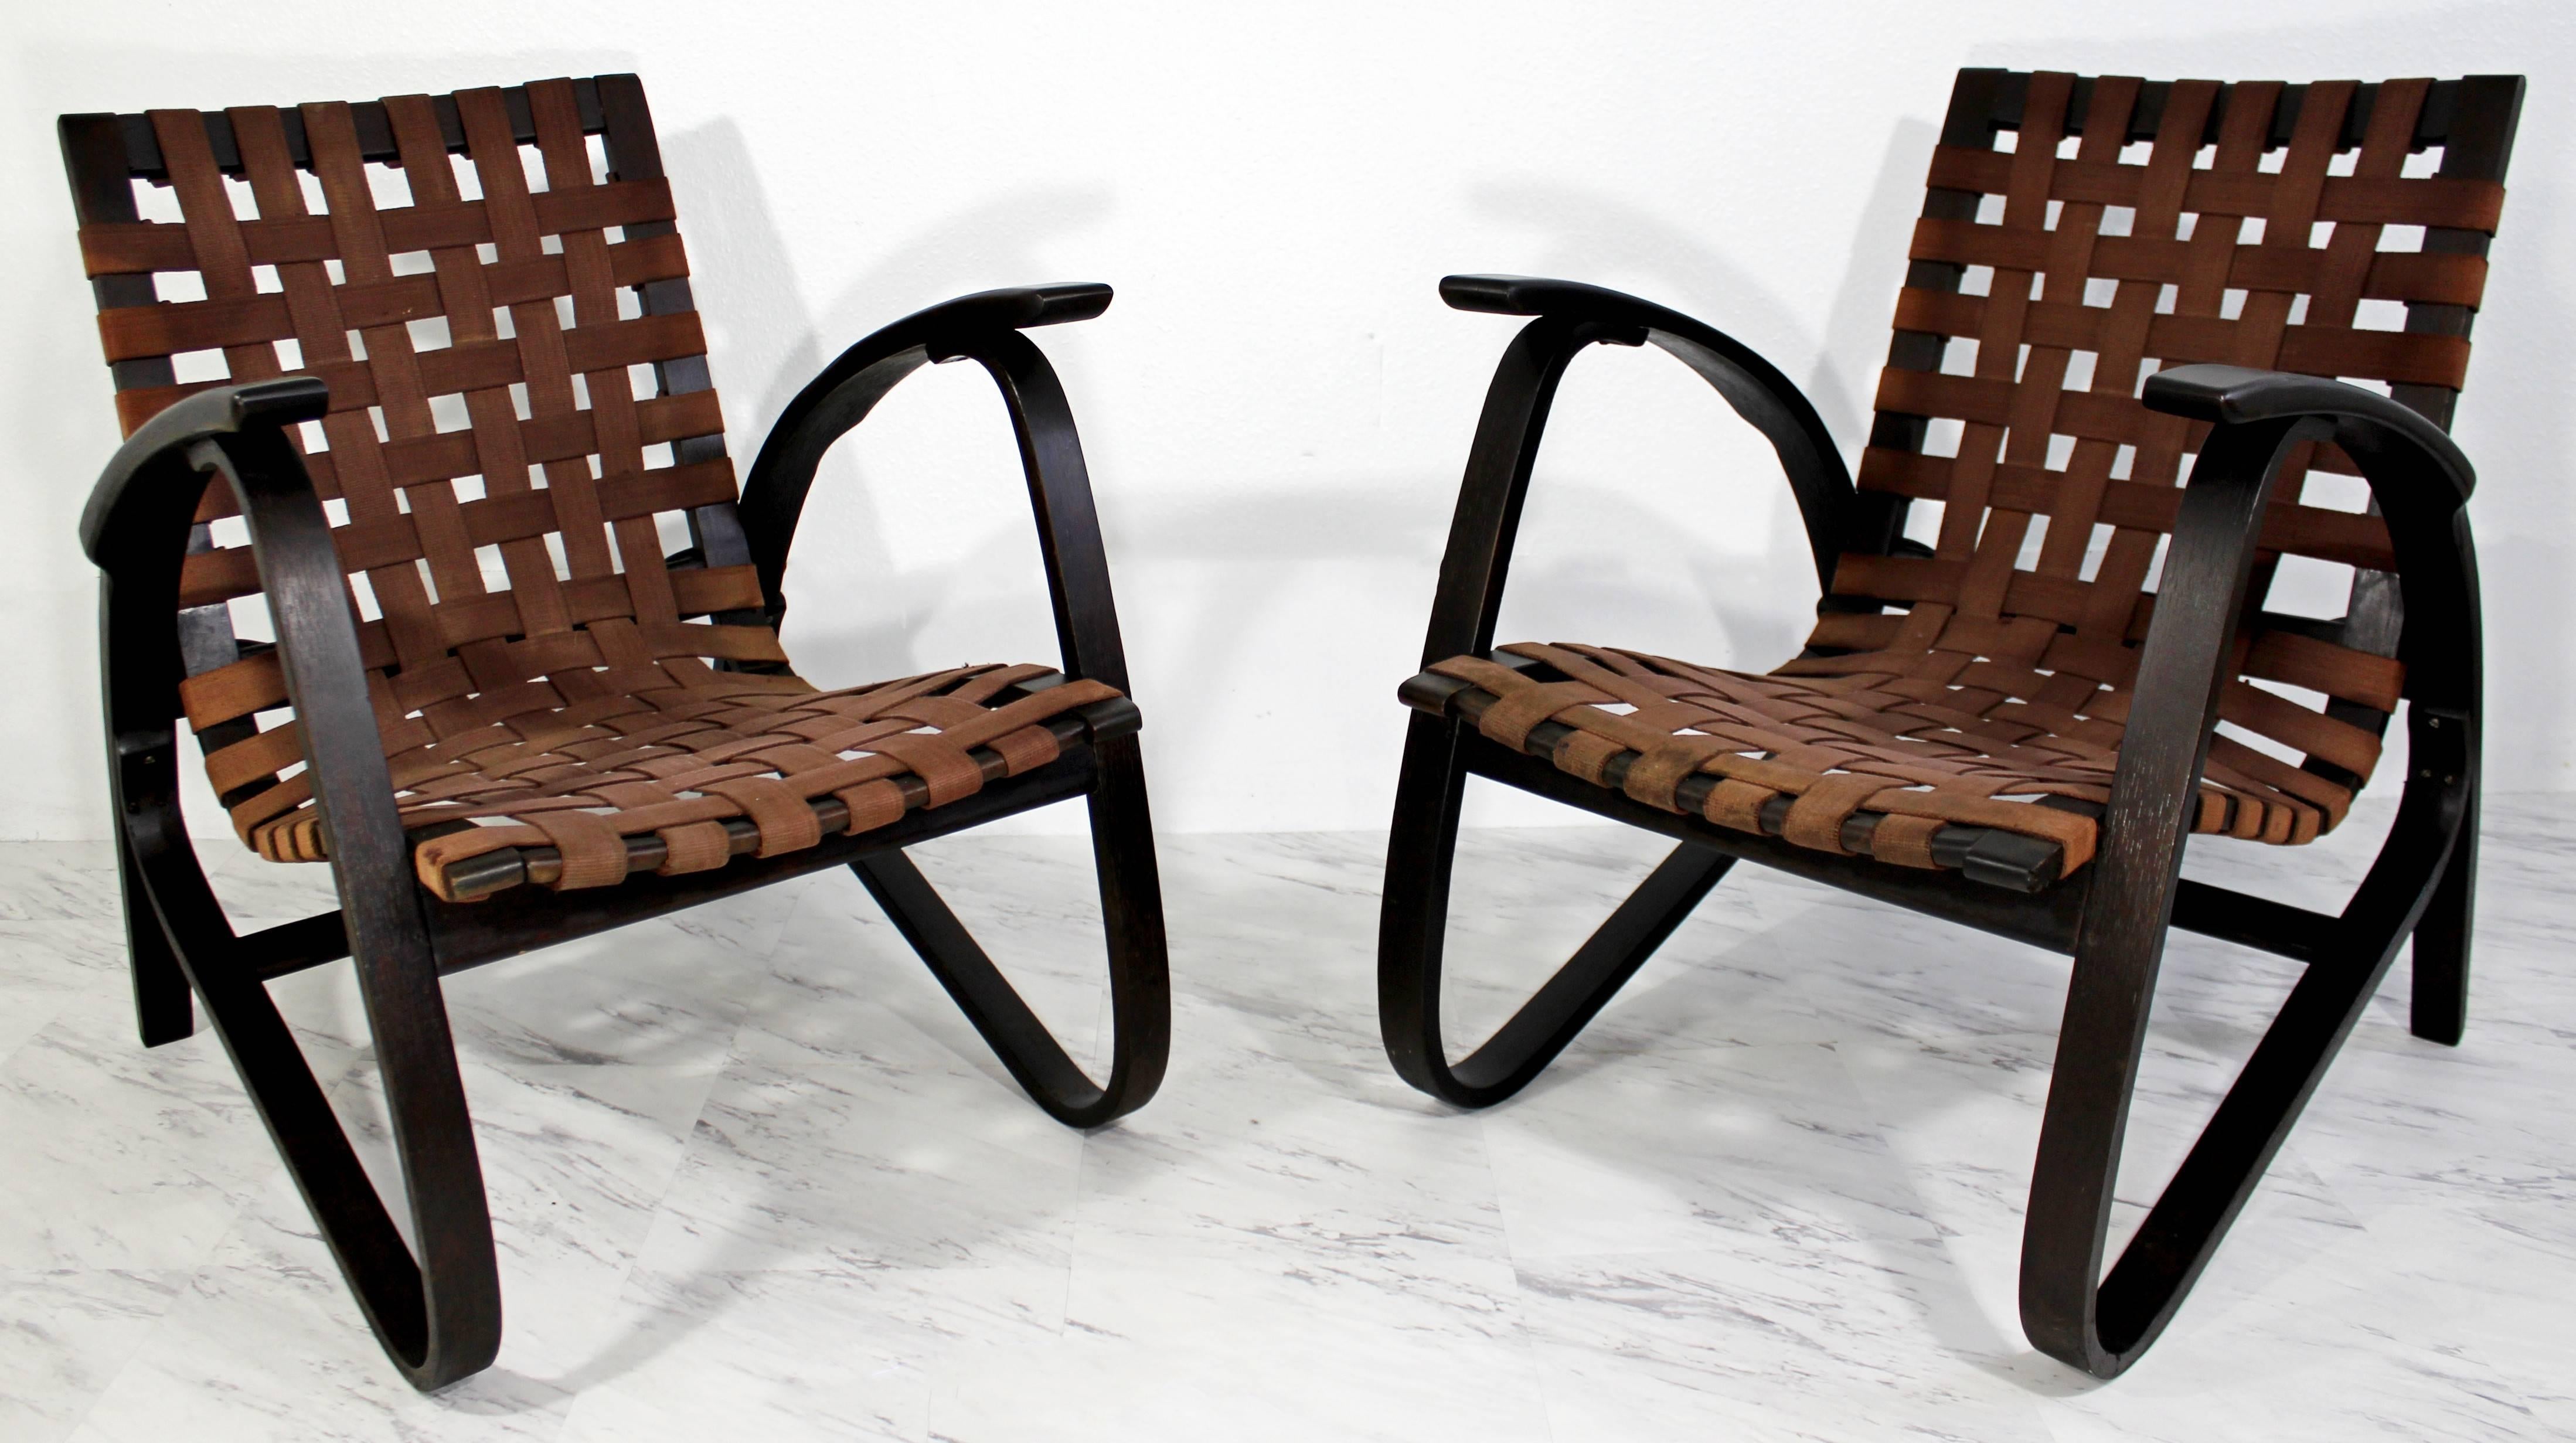 Absolutely gorgeous pair of black bentwood armchairs, with brown woven original strap seats, by Jan Vanek, circa 1930s. In great condition. The dimensions are 24